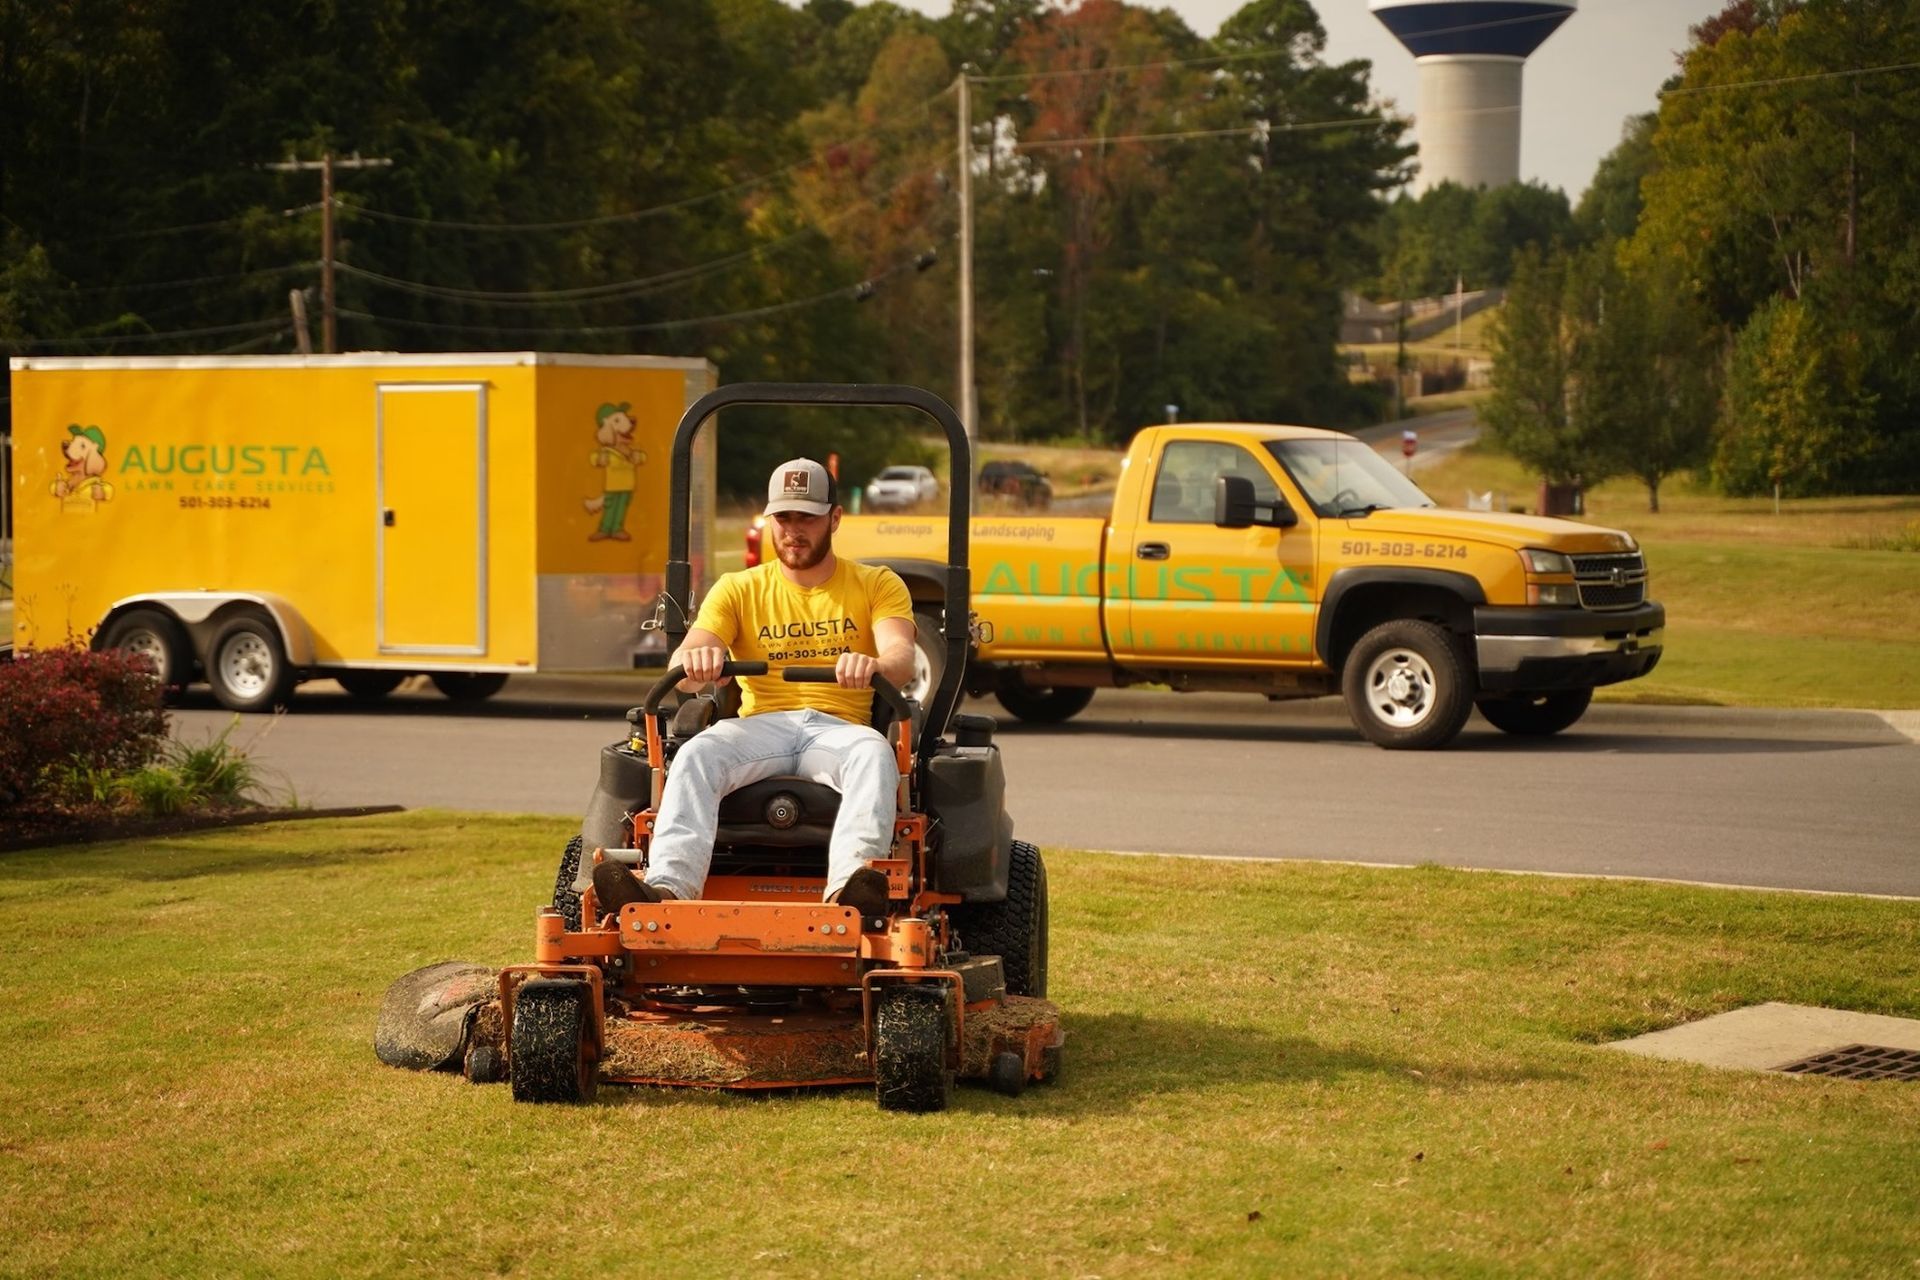 a man is riding a lawn mower in front of a yellow truck .